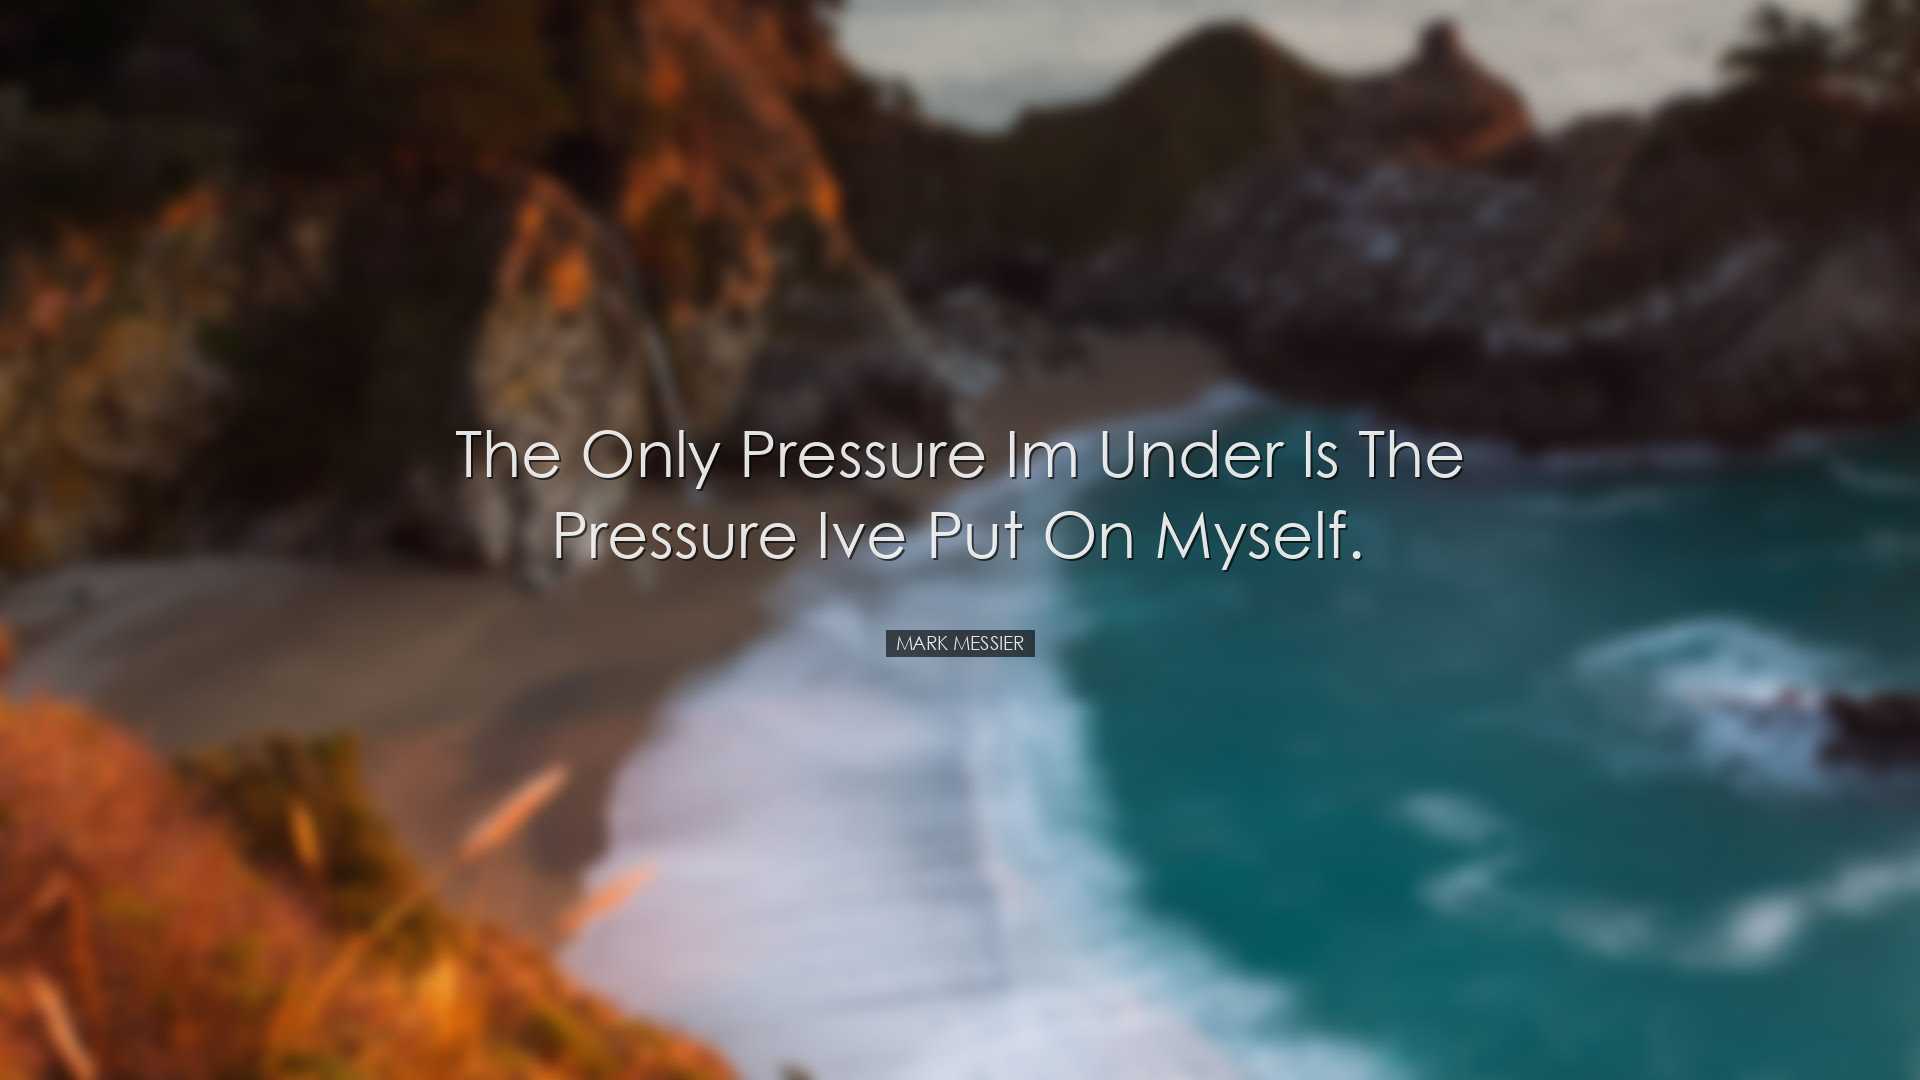 The only pressure Im under is the pressure Ive put on myself. - Ma